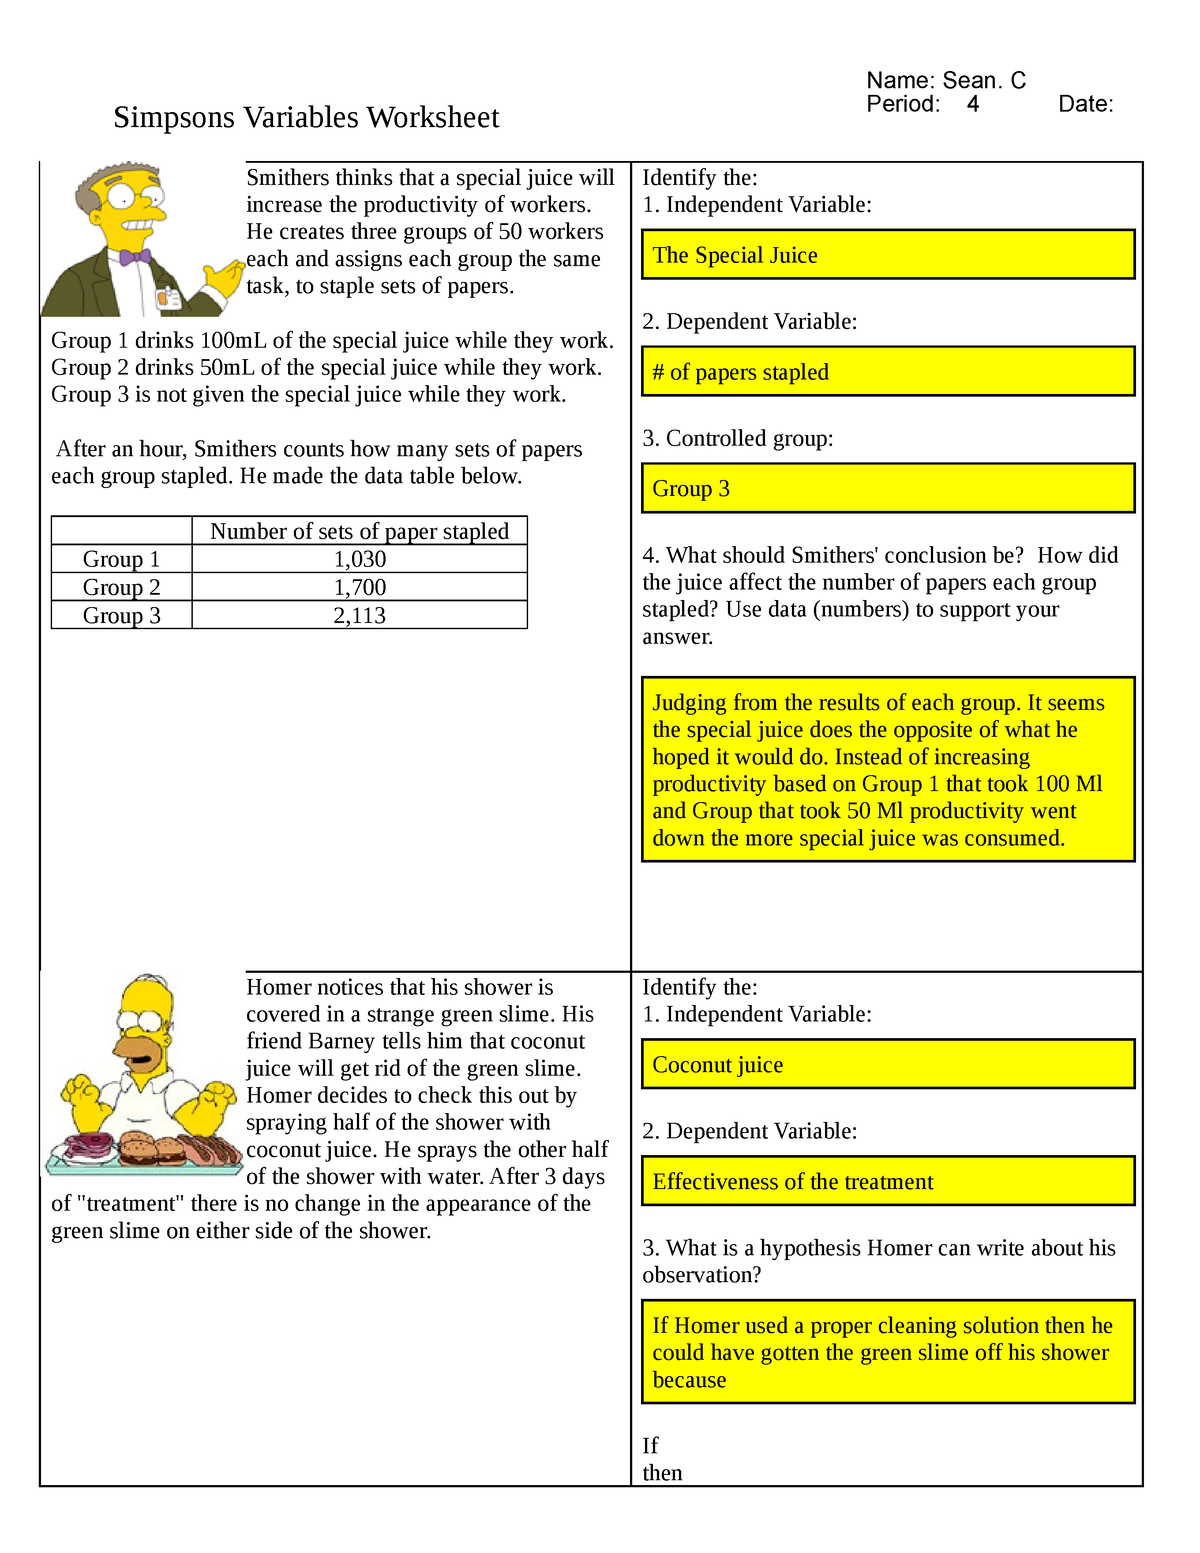 Simpsons variables stufff Simpsons Variables Worksheet Smithers